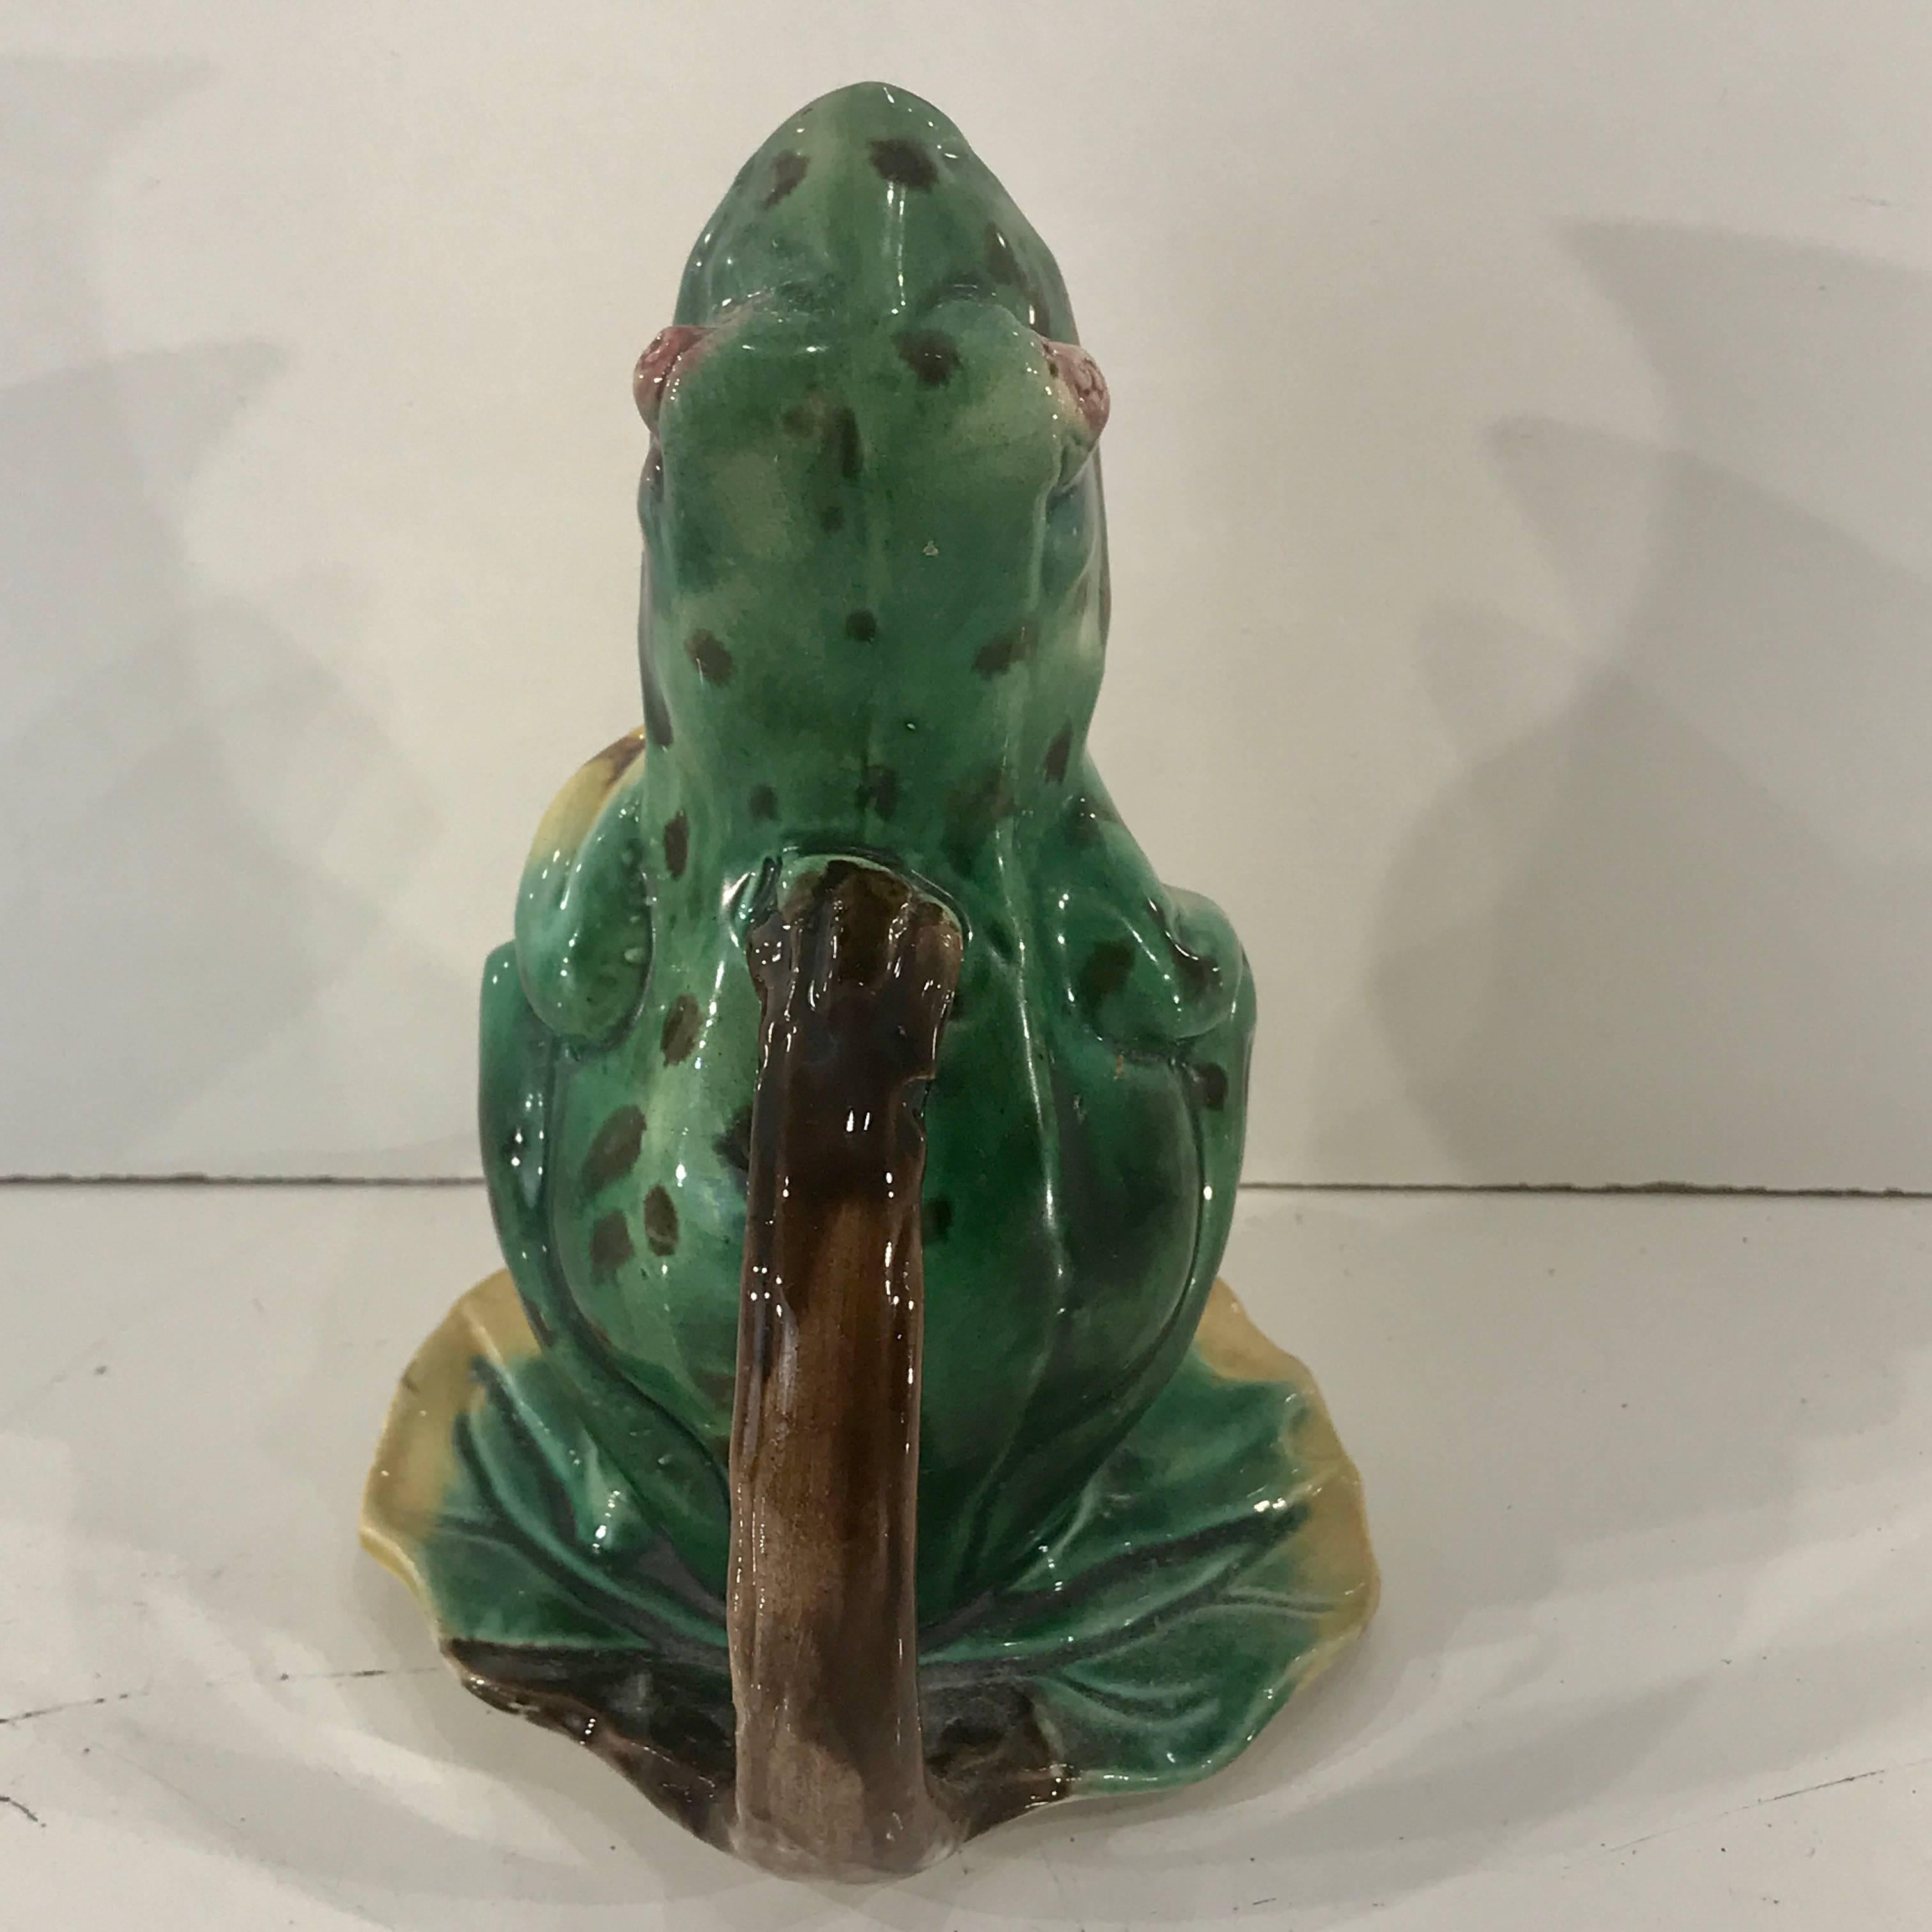 Mid-19th Century 19th century English Majolica Frog Pitcher by Edward Steele